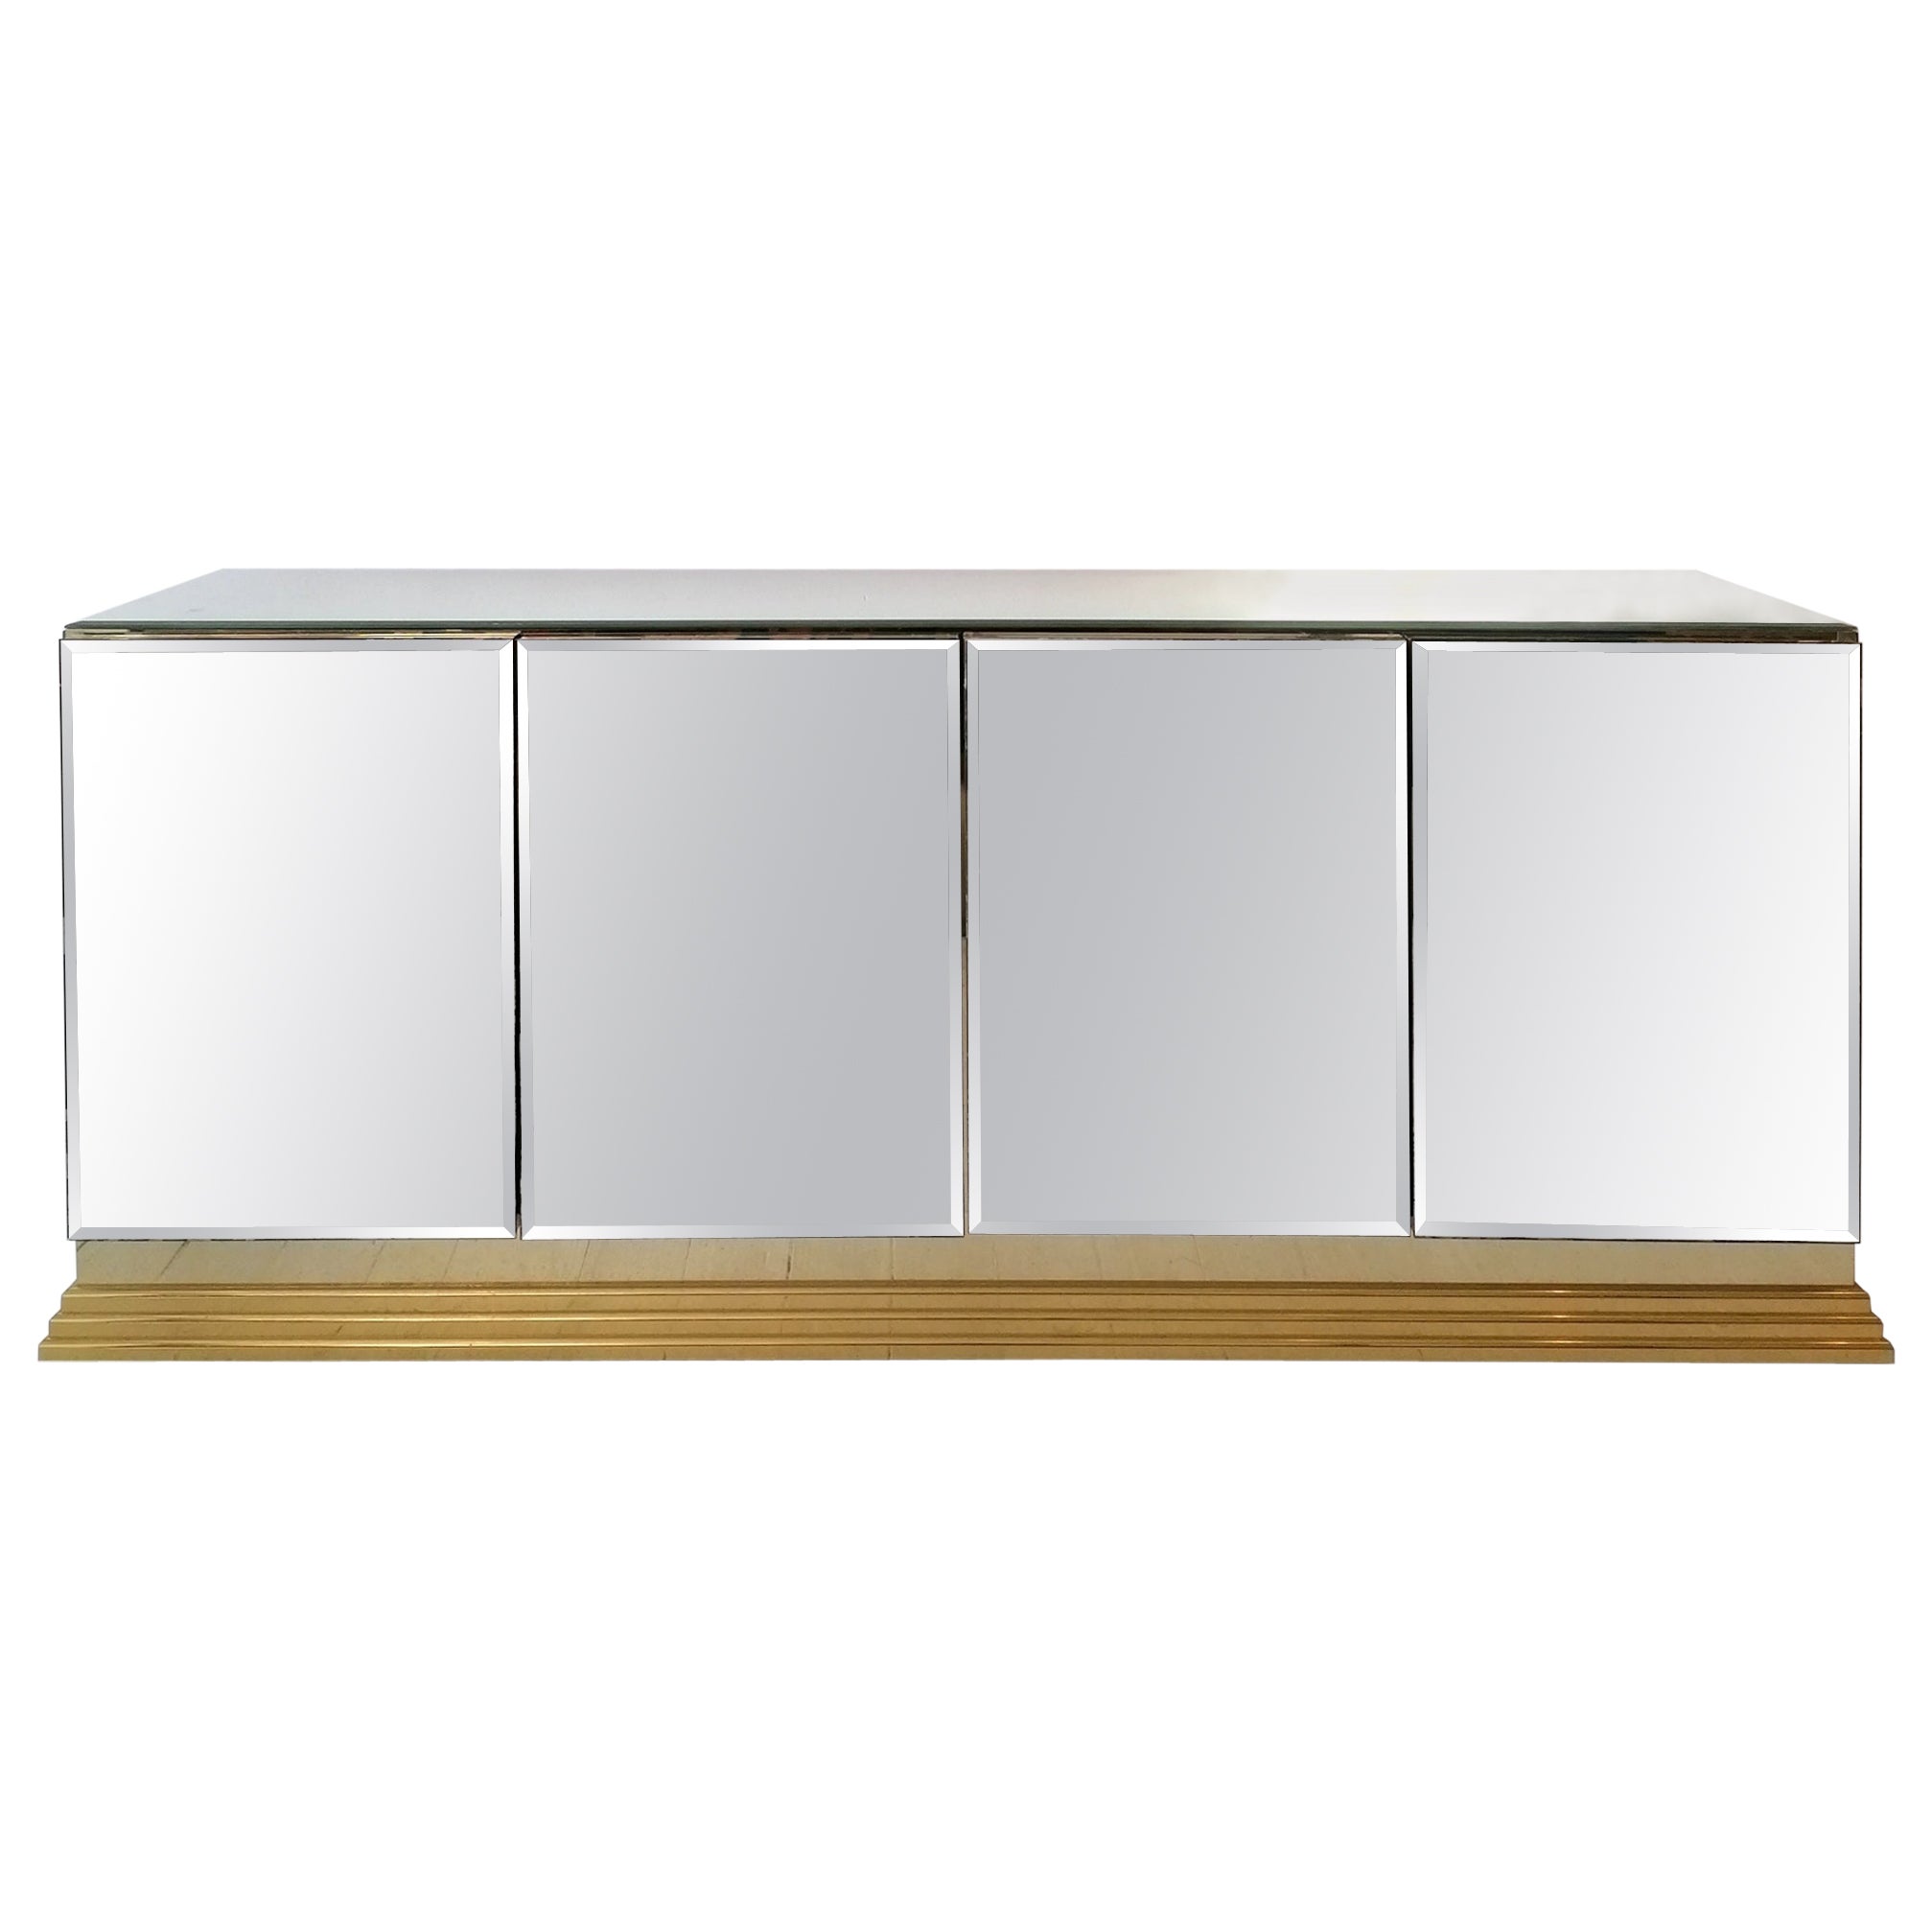 Vintage Mirrored Sideboard with Brass Base, by Ello Furniture USA, 1970s / 80s